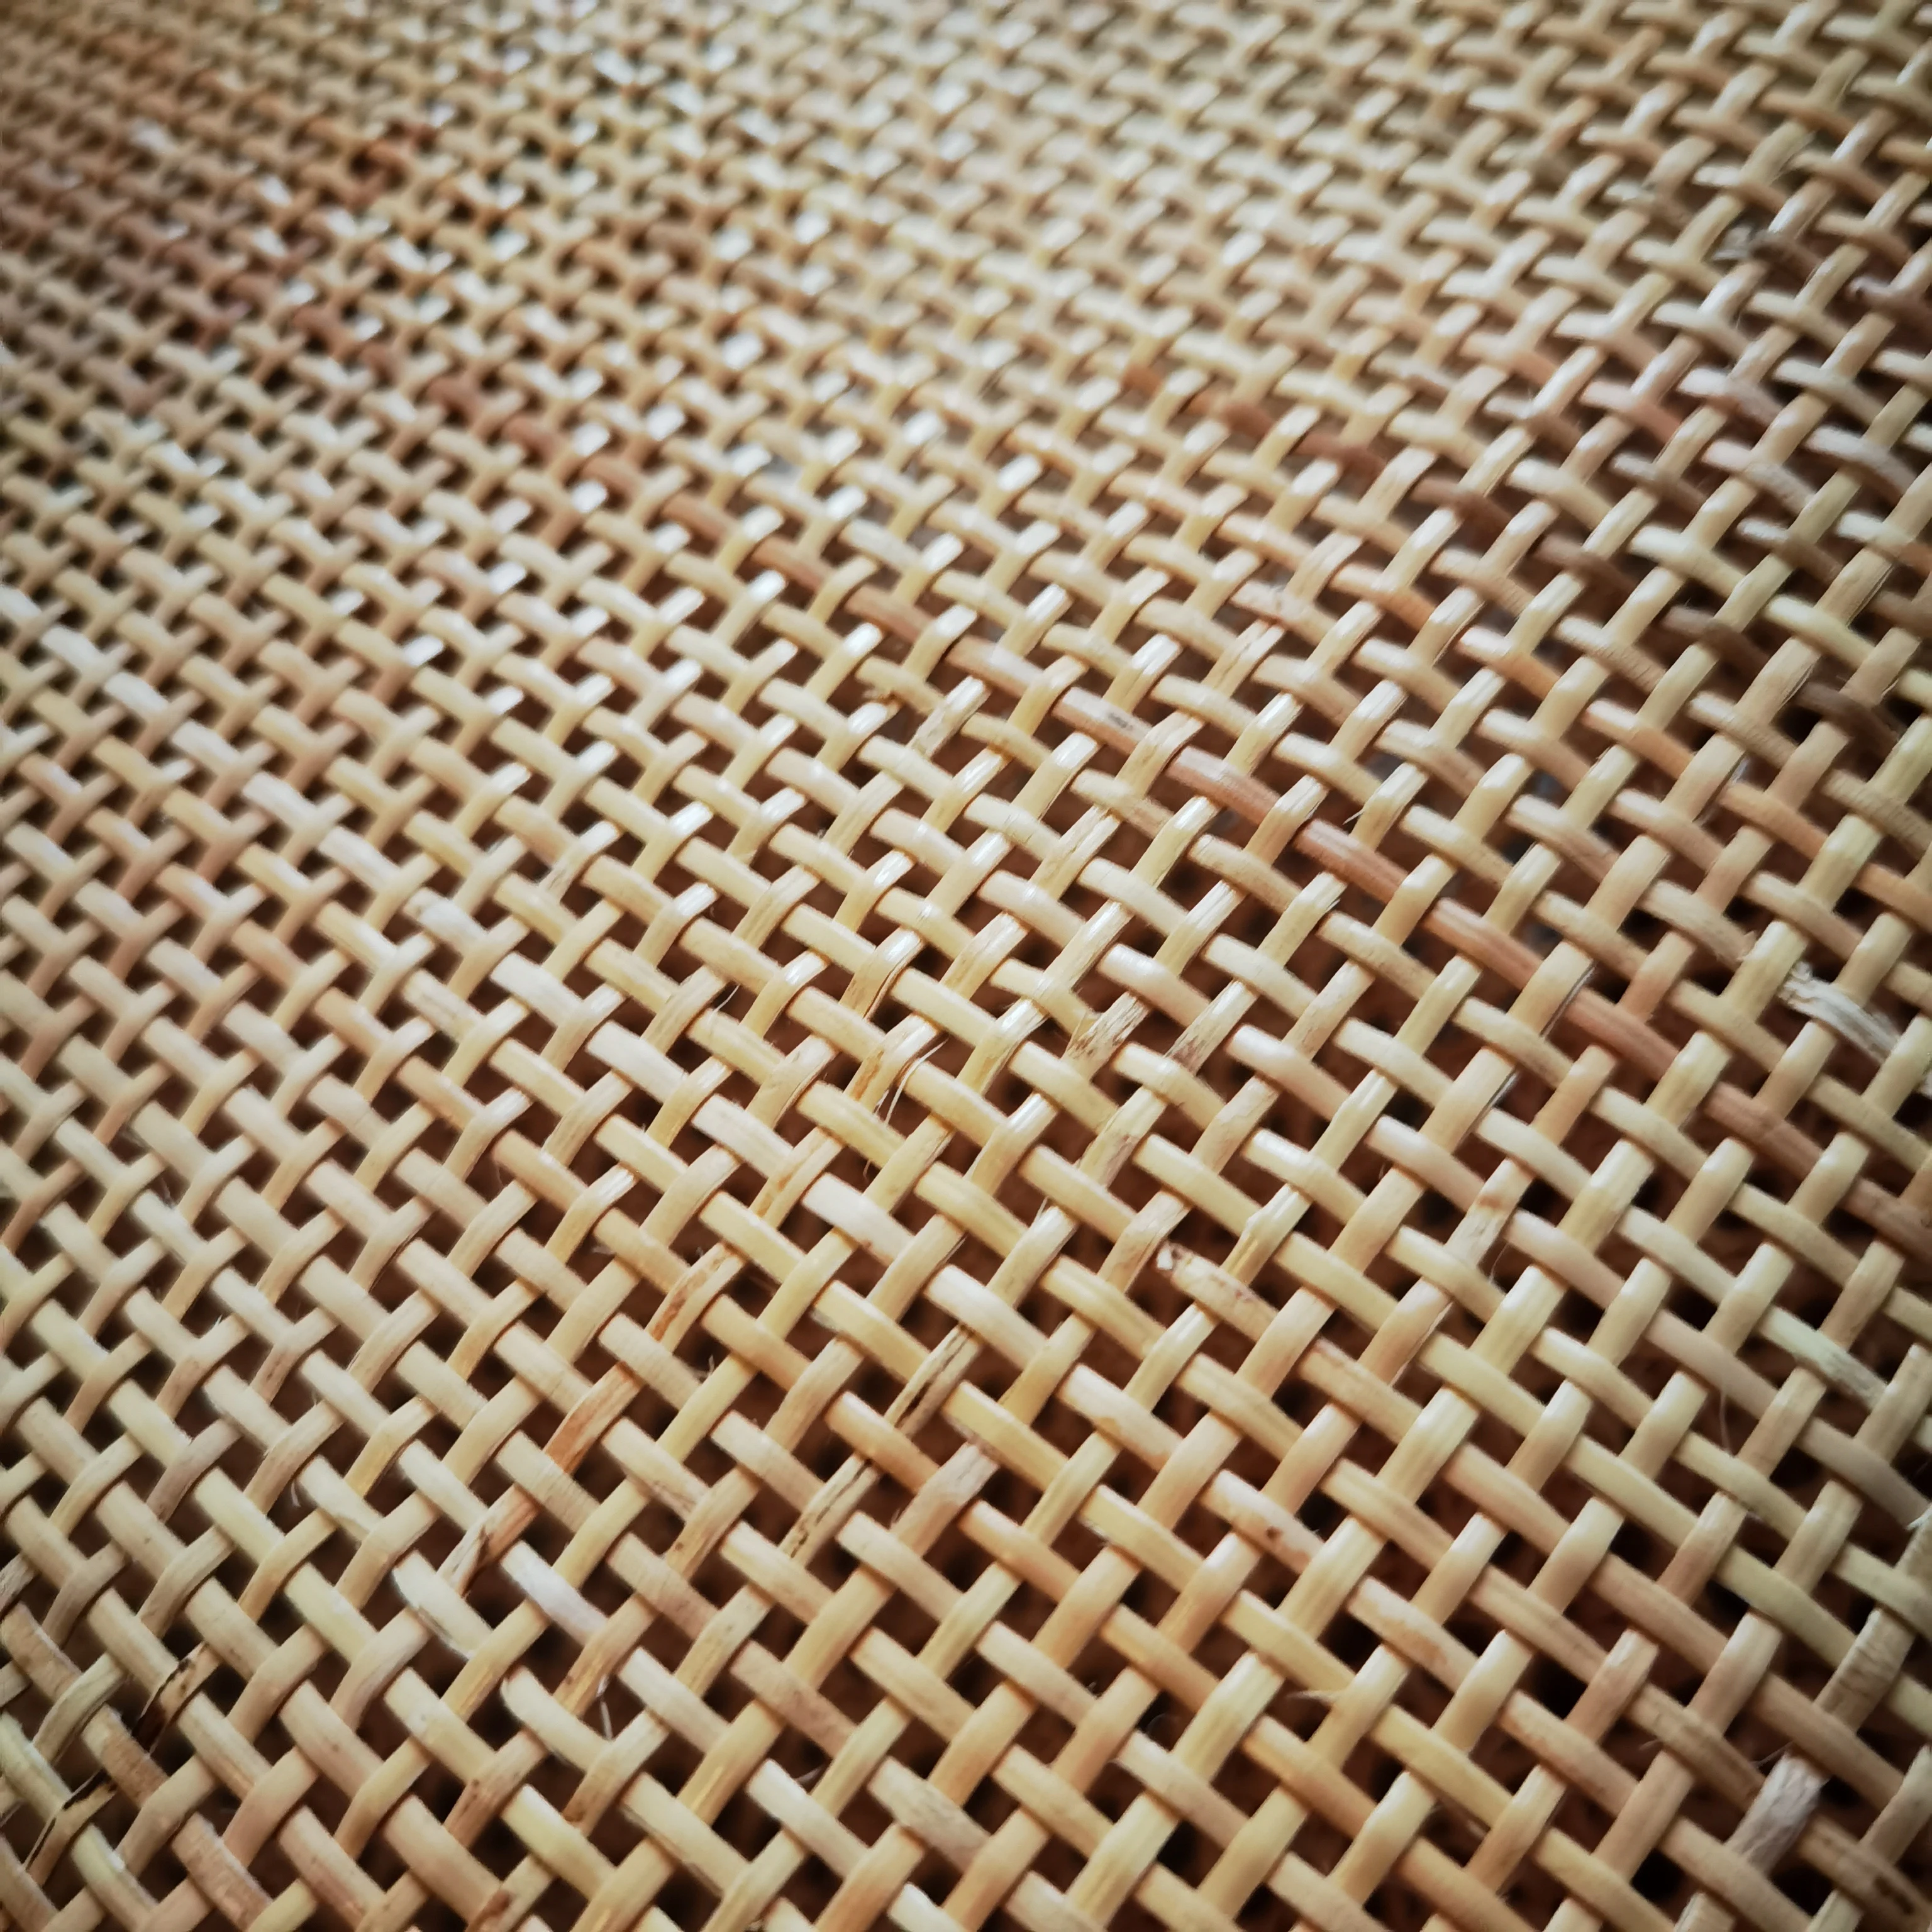 50cm x 1--1.5 Meters Natural Cane Webbing 2.0mm Checkered Real Indonesia Rattan Woven Roll Wardrobe Shoe Cabinet Accessories